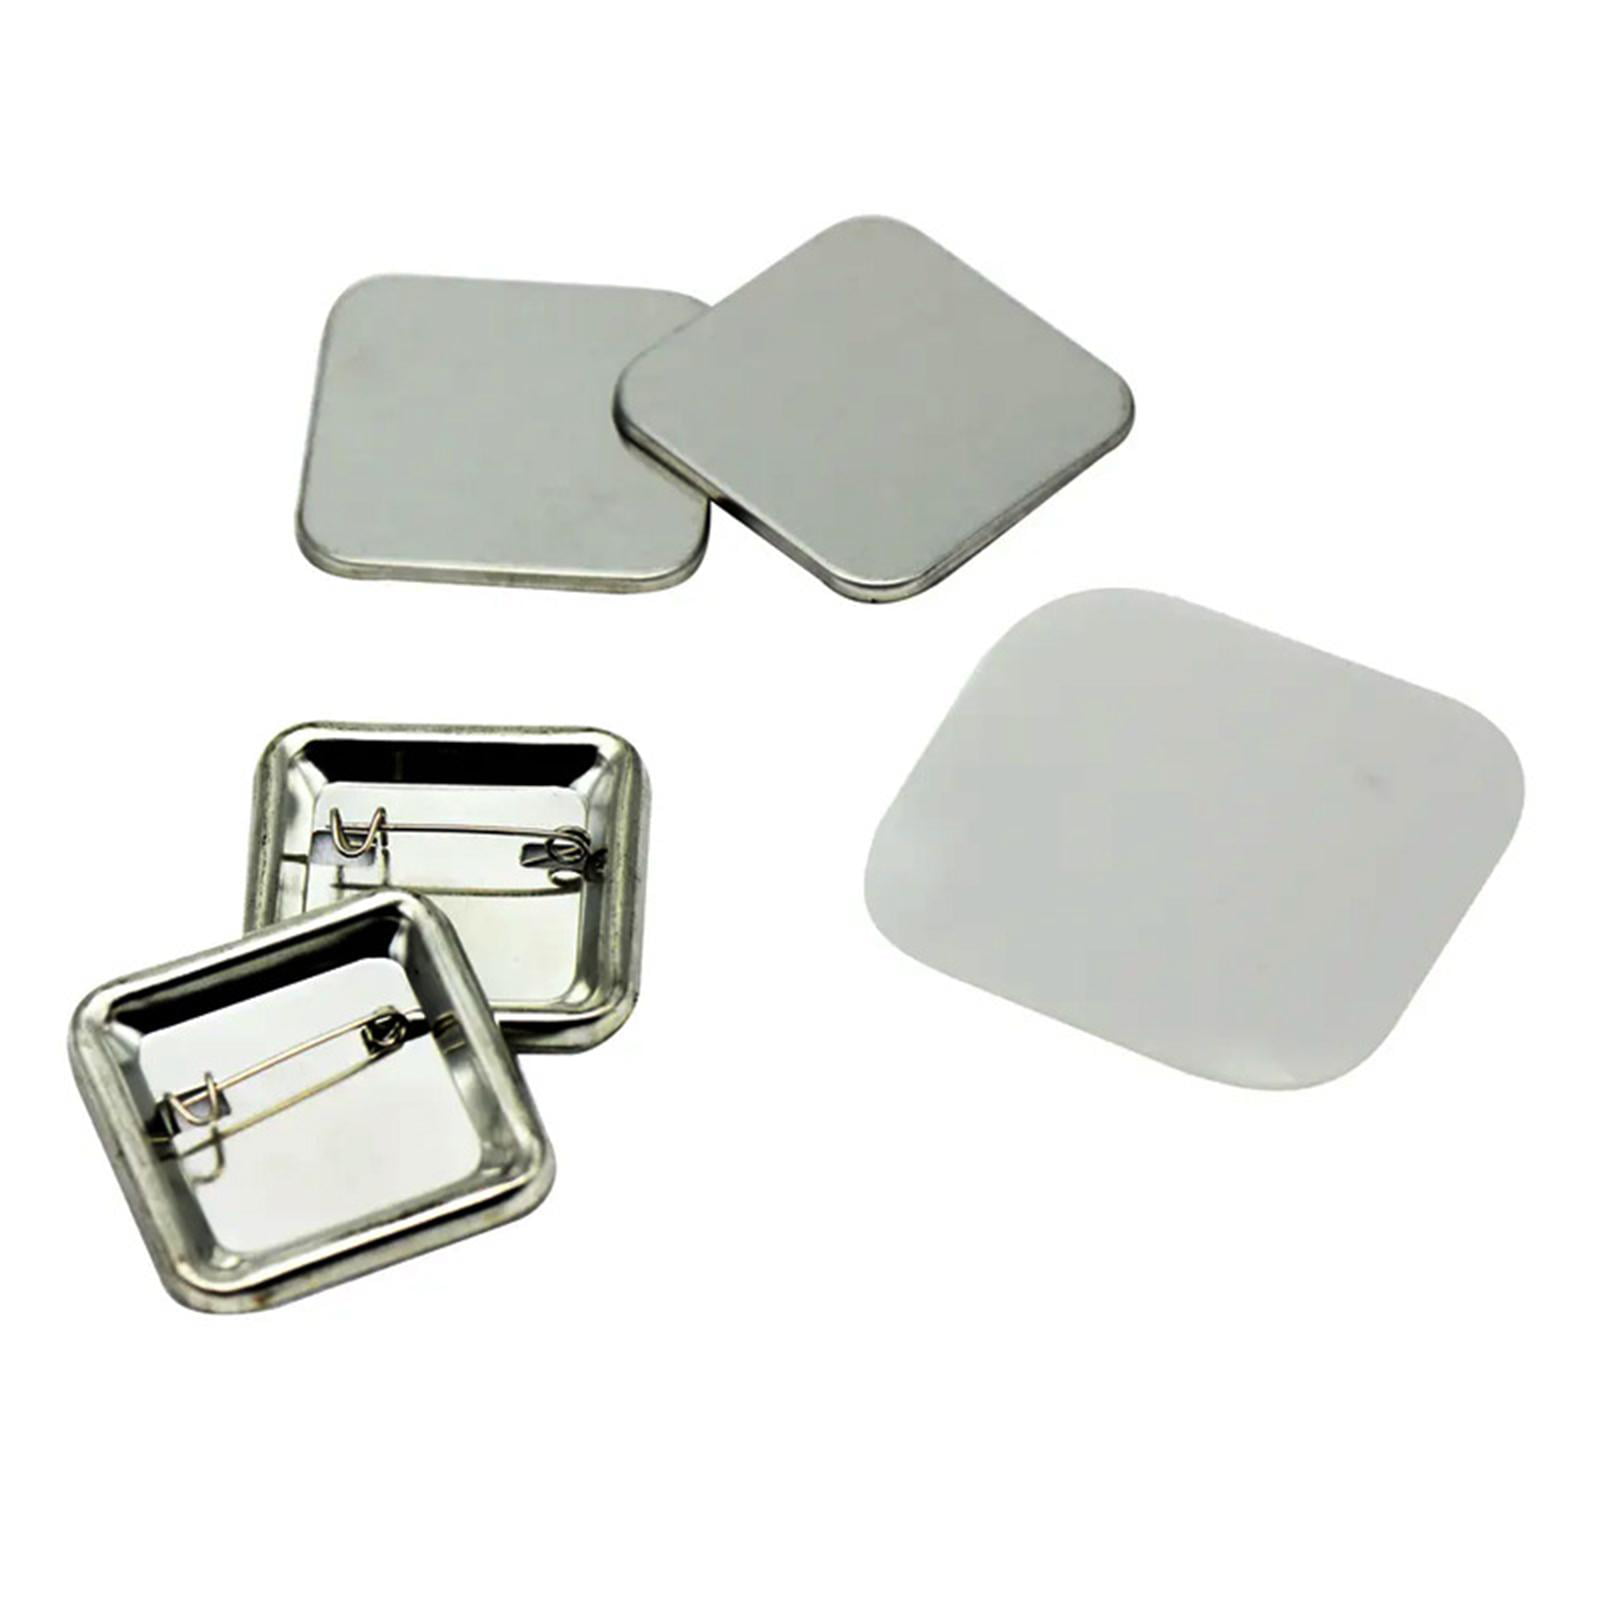 85*31mm blank rectangle shape pin button Parts on hot sale